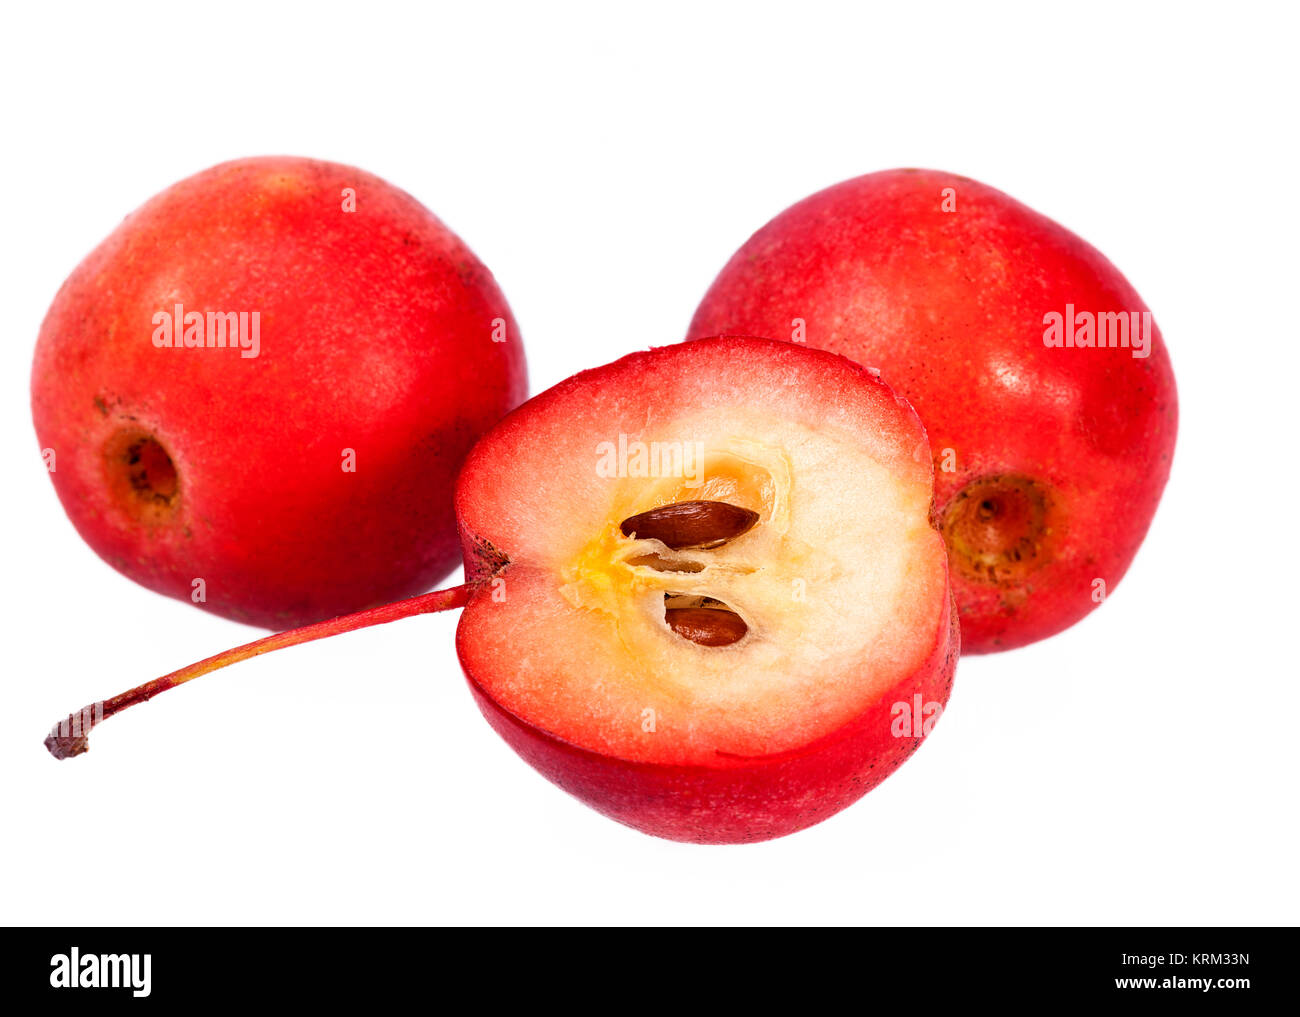 https://c8.alamy.com/comp/KRM33N/red-paradise-apples-isolated-on-white-background-KRM33N.jpg